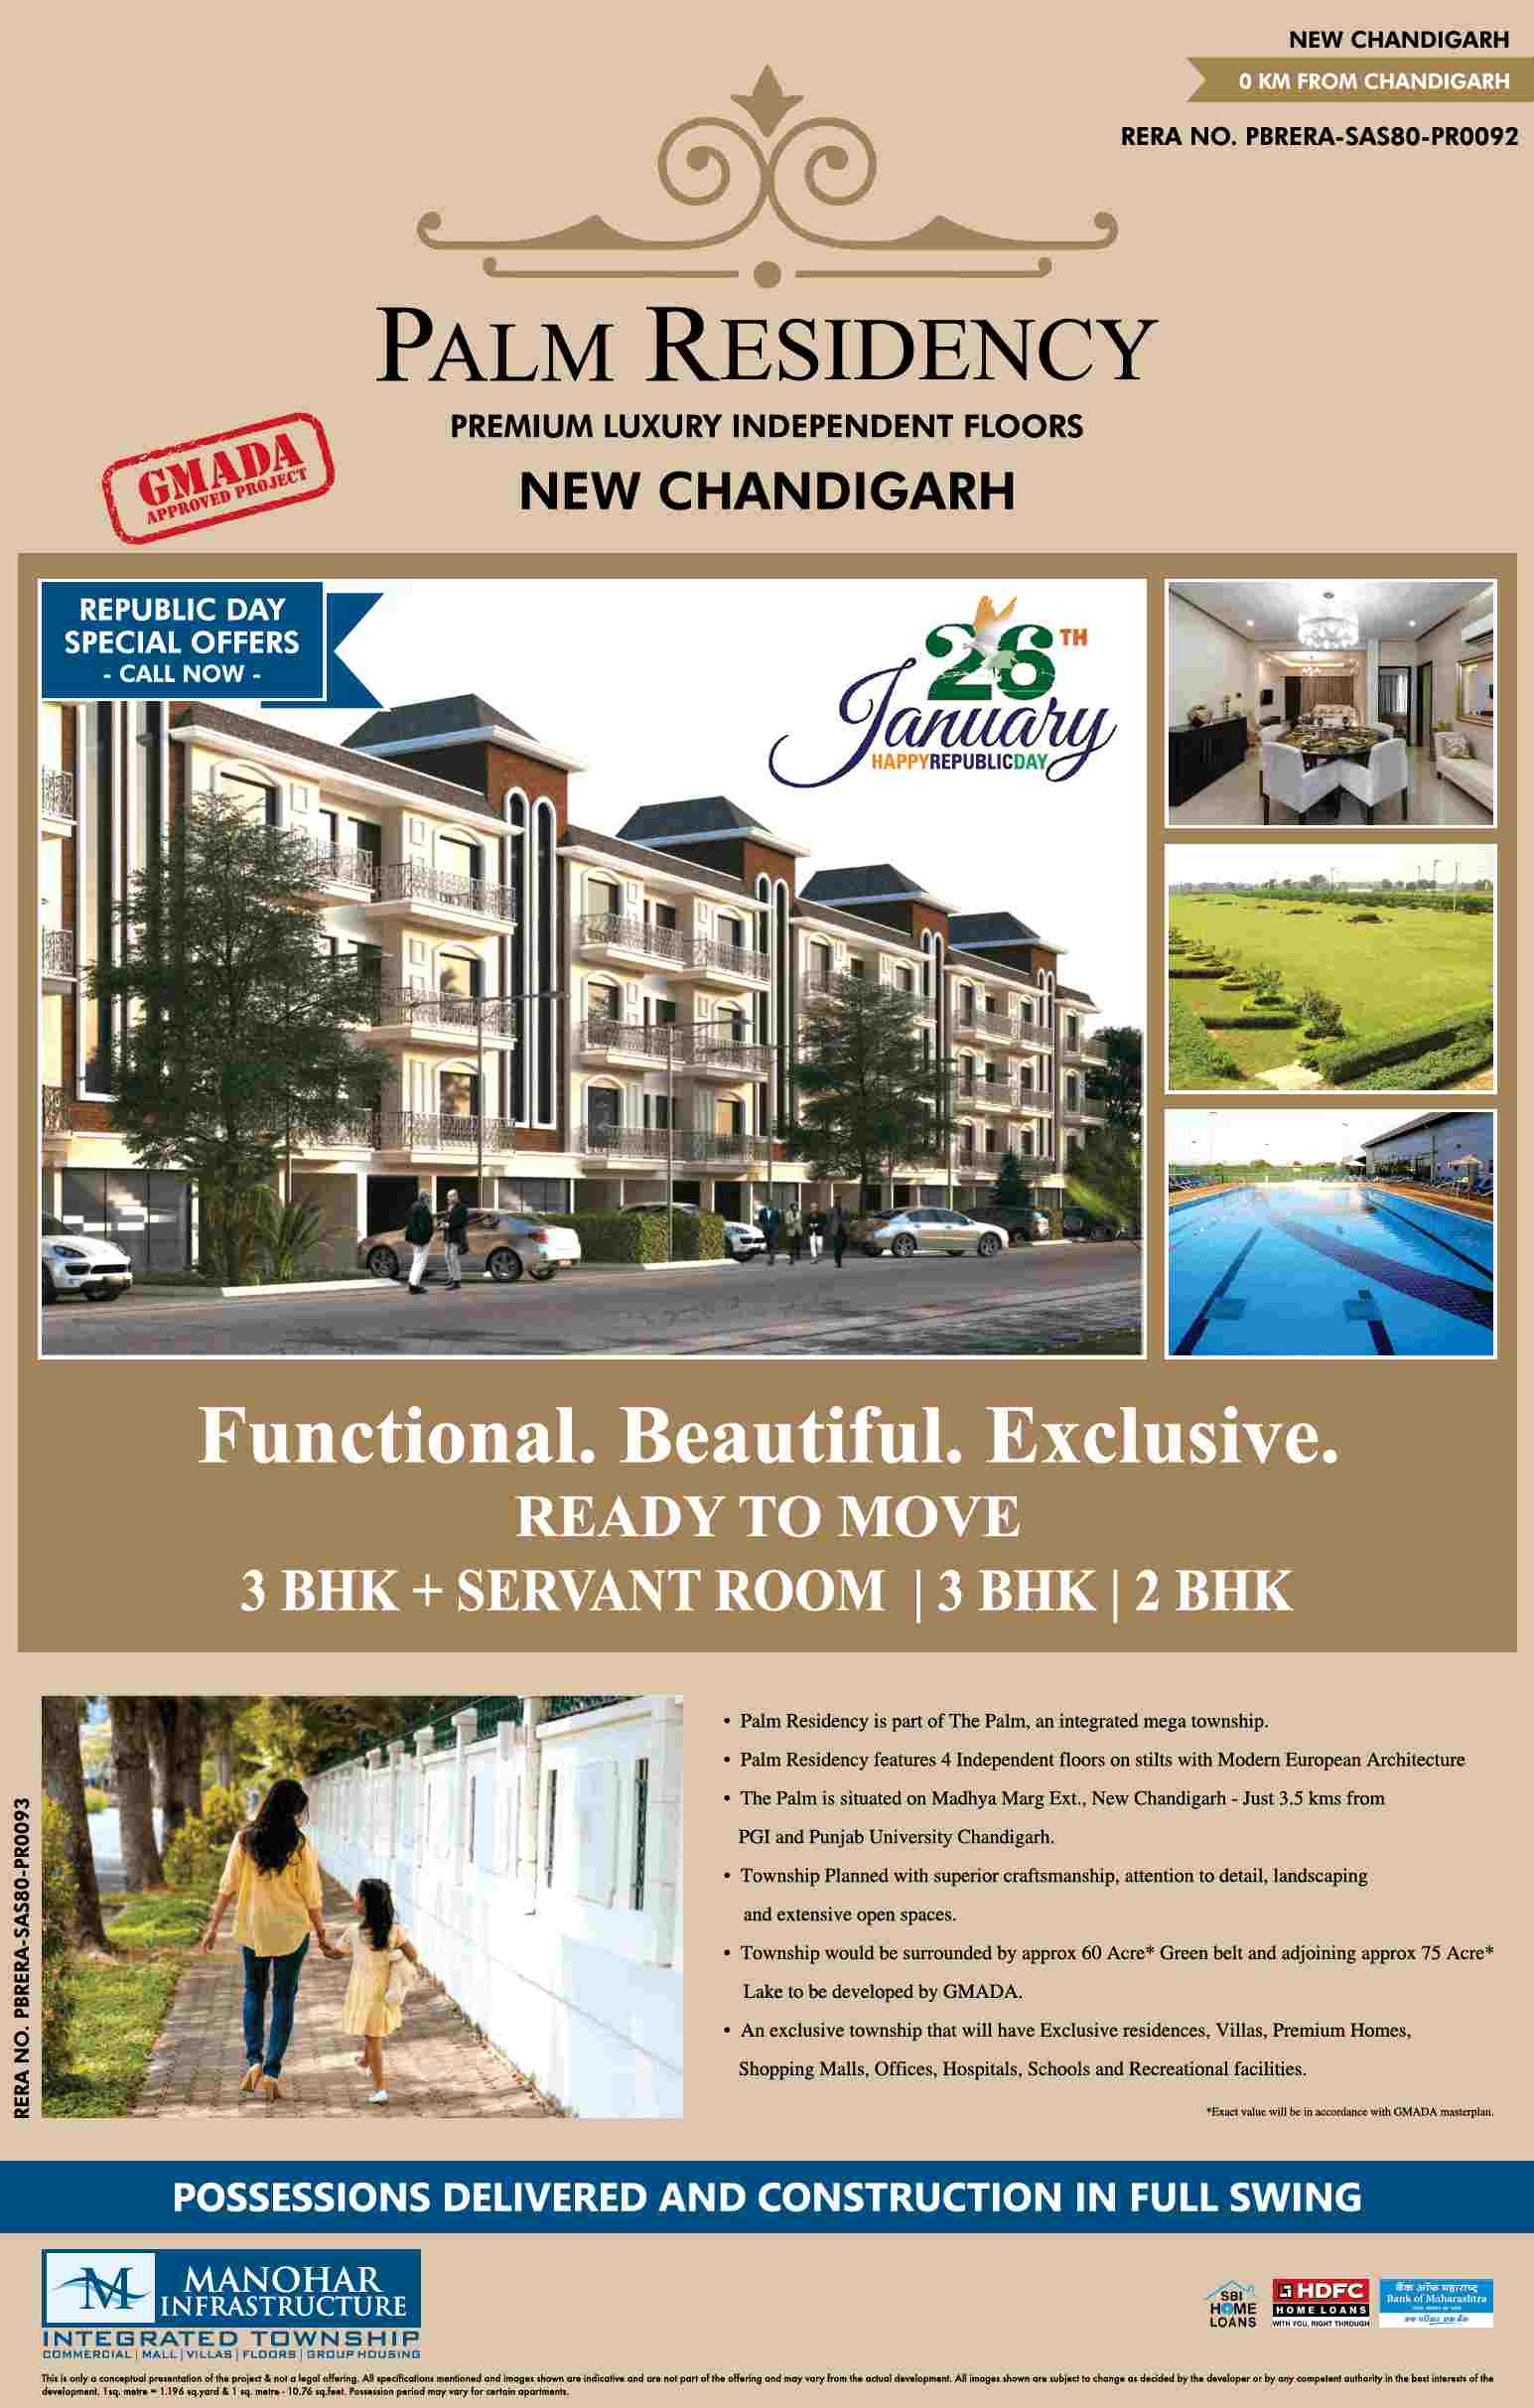 Possession delivered & construction in full swing at Manohar Palm Residency in Chandigarh Update